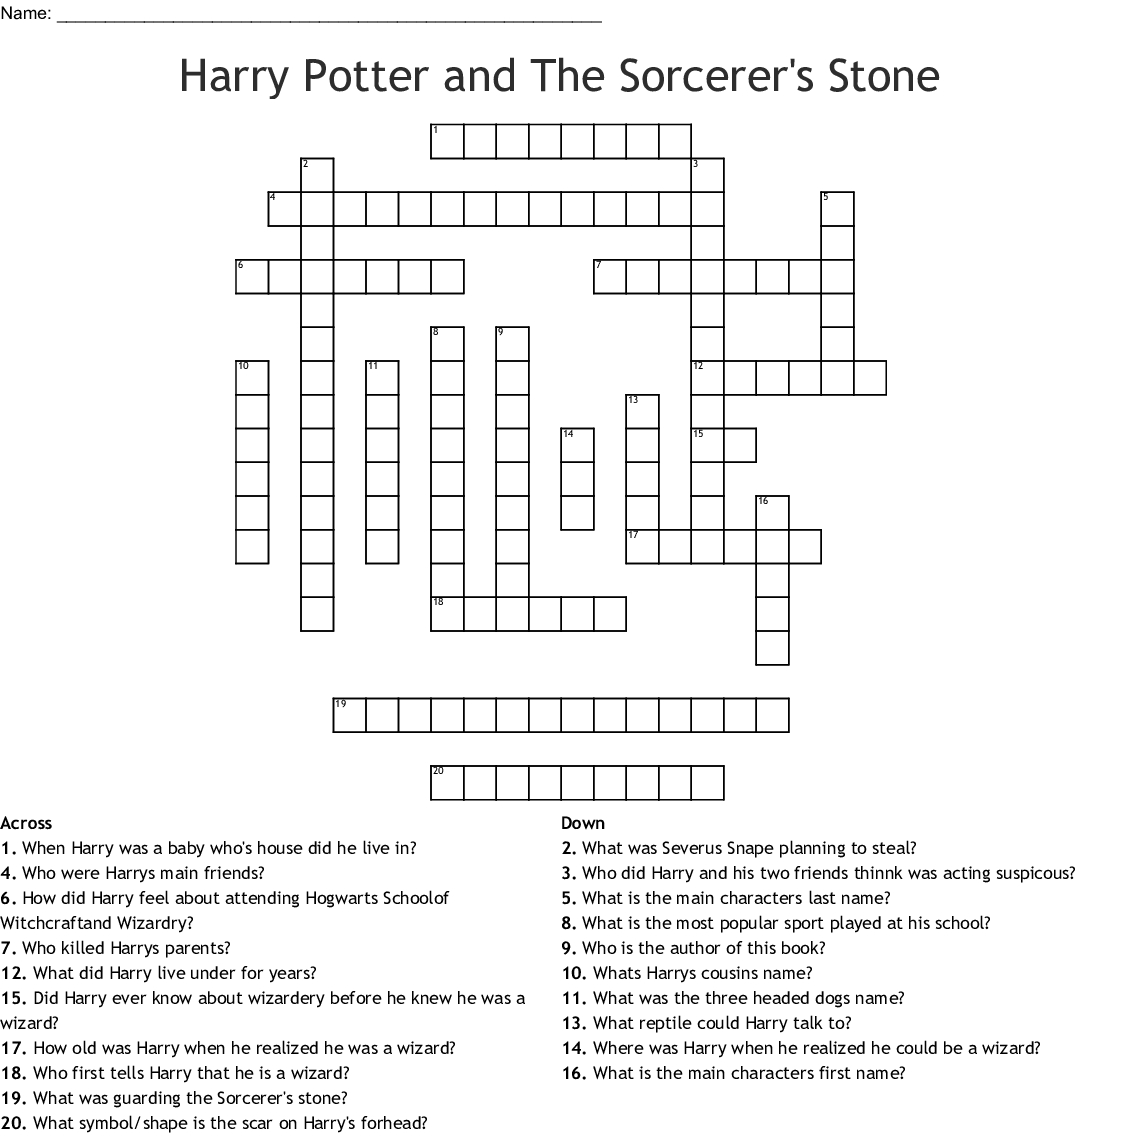 Harry Potter And The Sorcerer's Stone Crossword - Wordmint - Printable Crossword Puzzles Harry Potter